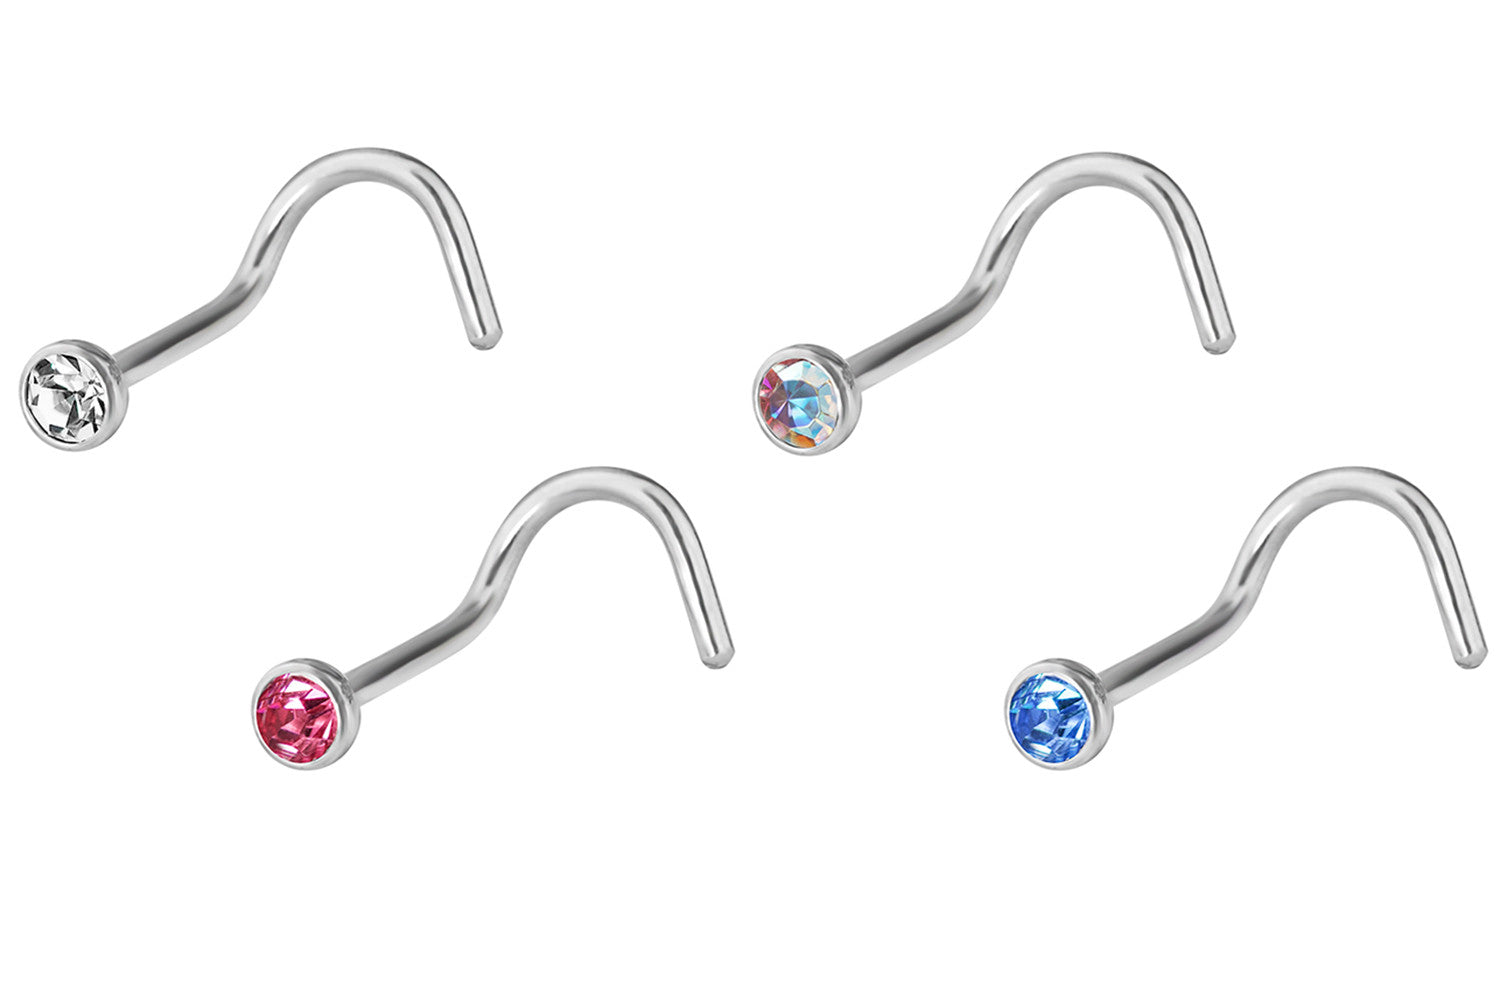 These nose screws are 18 gauge with 2.5 mm Cubic Zirconia crystals. This set includes 4 nose screws in the colors shown (not randomly selected, and no repeat colors).